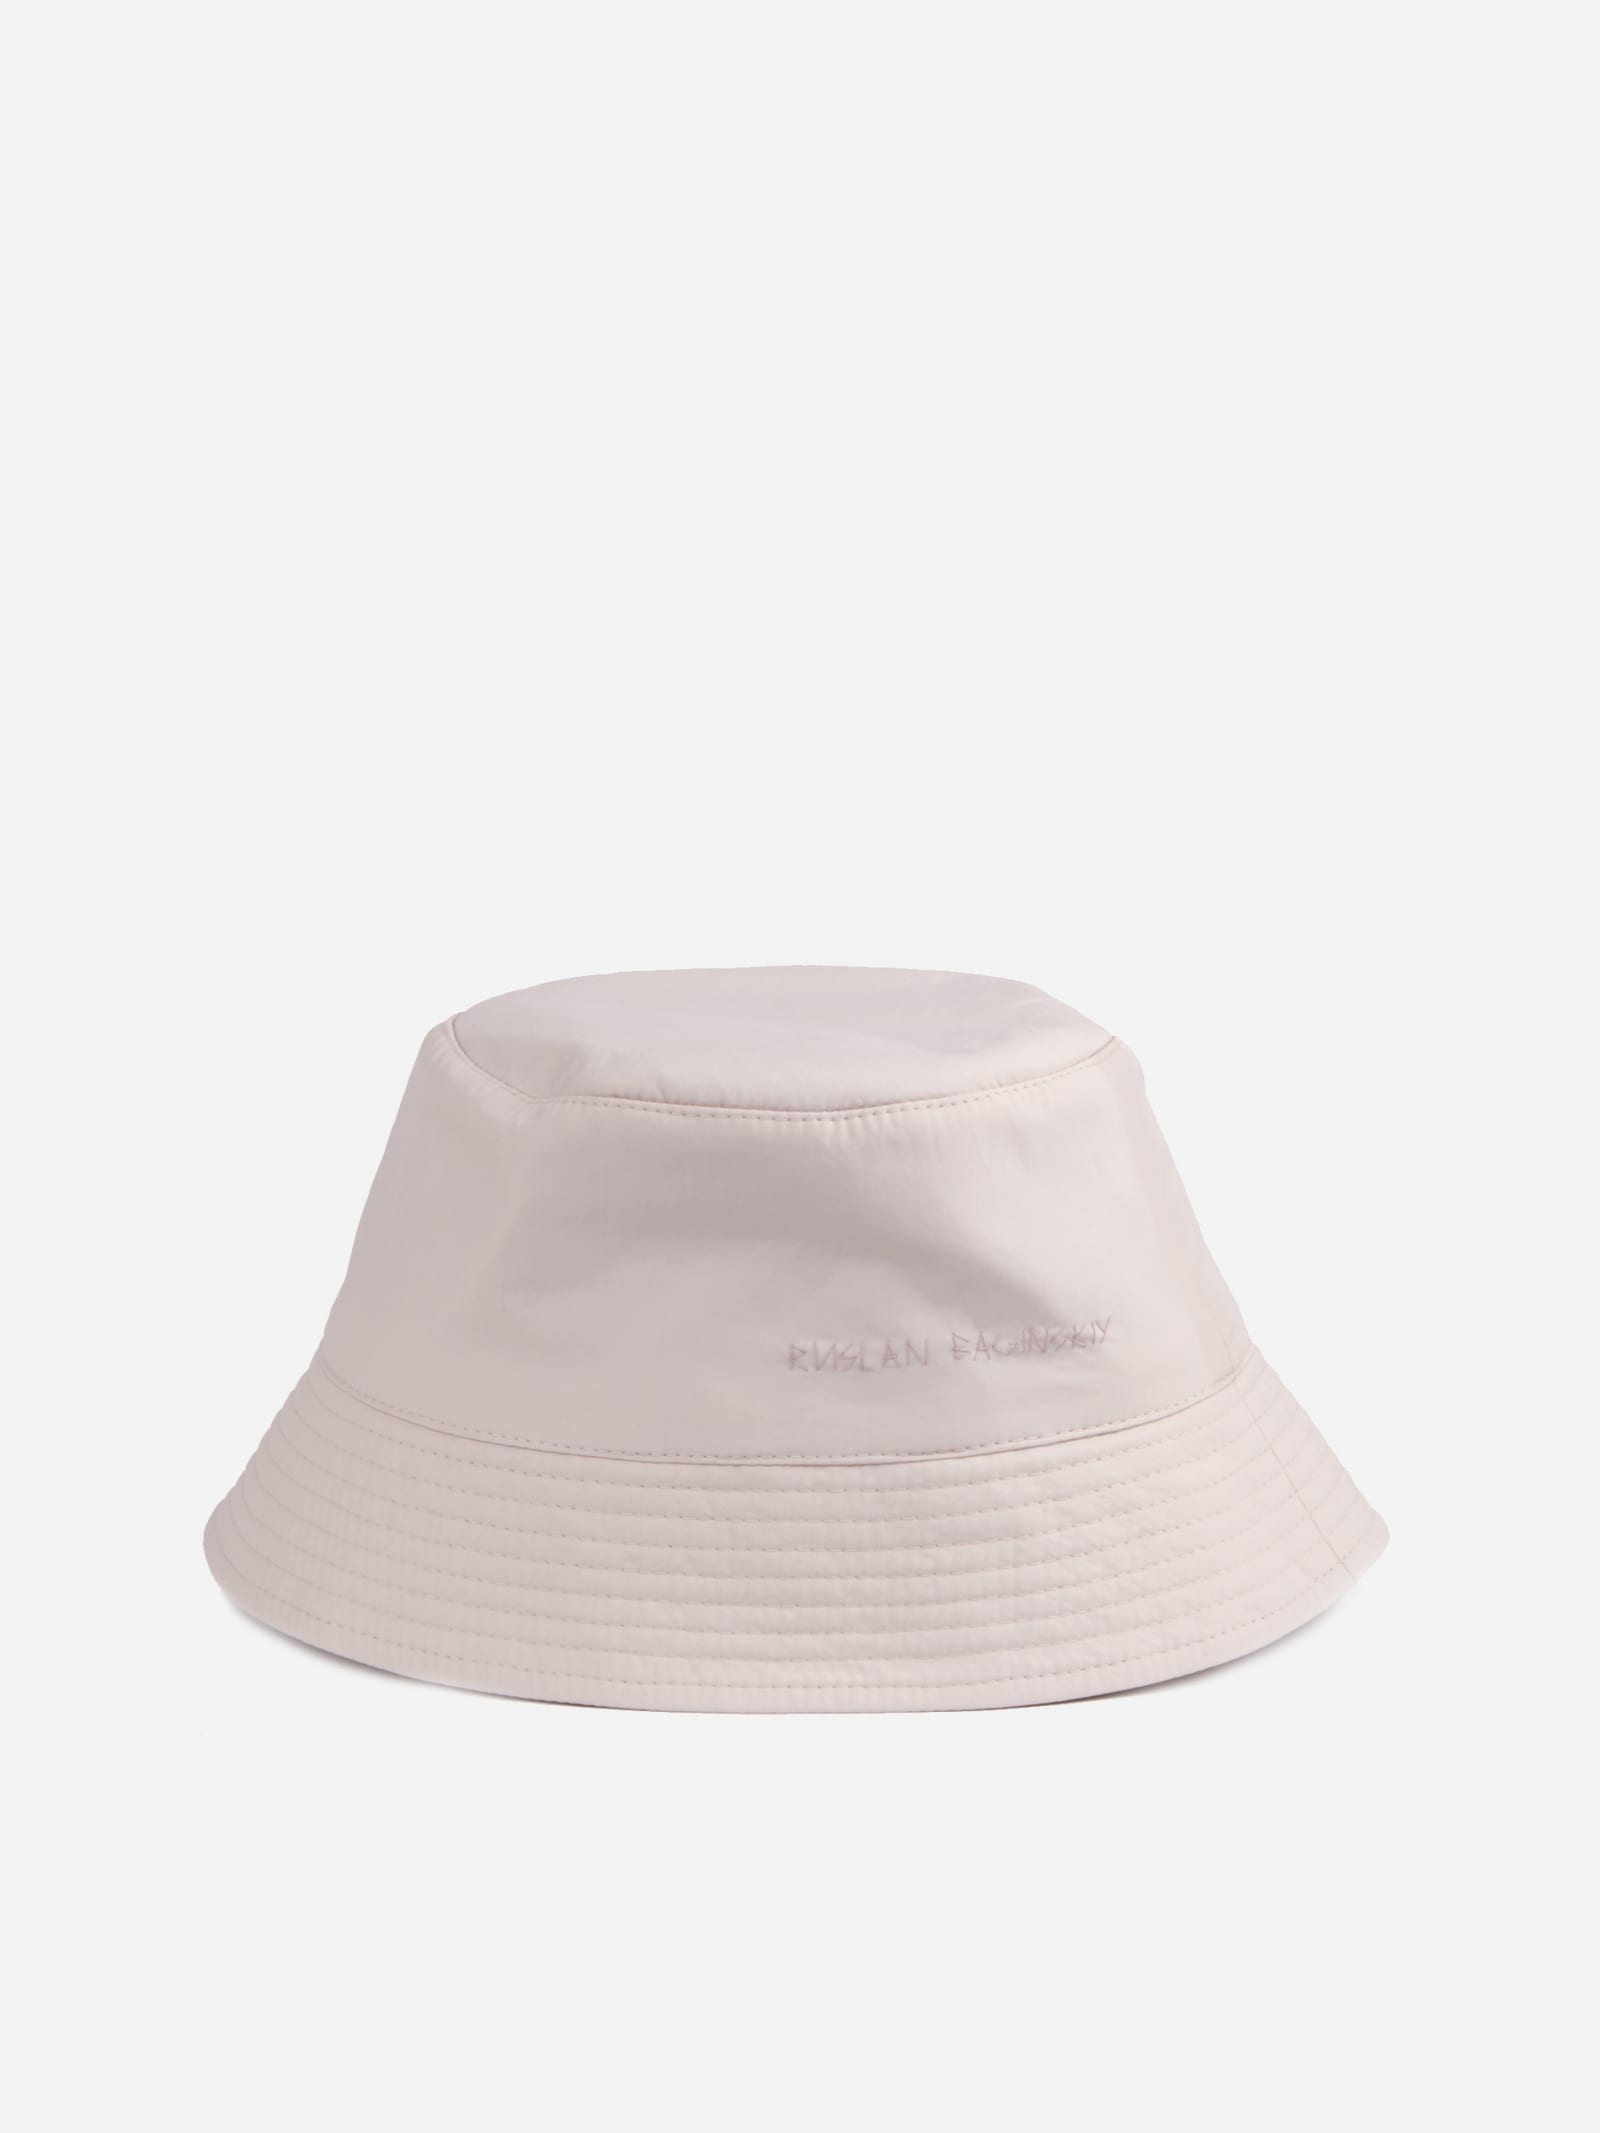 Ruslan Baginskiy Lampshade Bucket Hat With Embroidered Logo